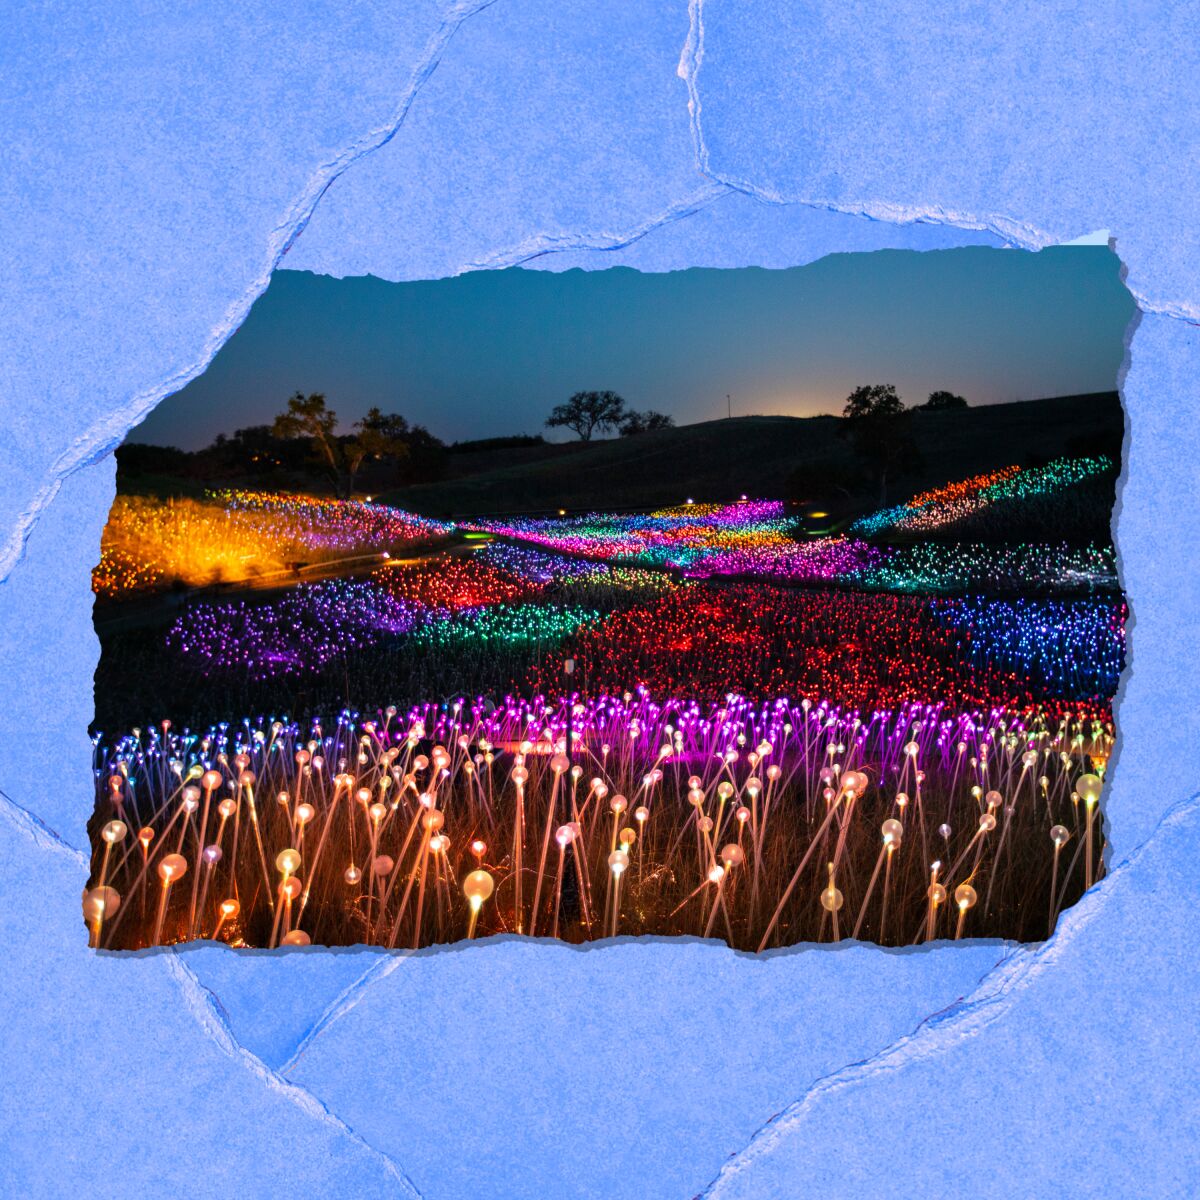 At dusk, rolling hills are covered with patches of tiny lights in varying colors.